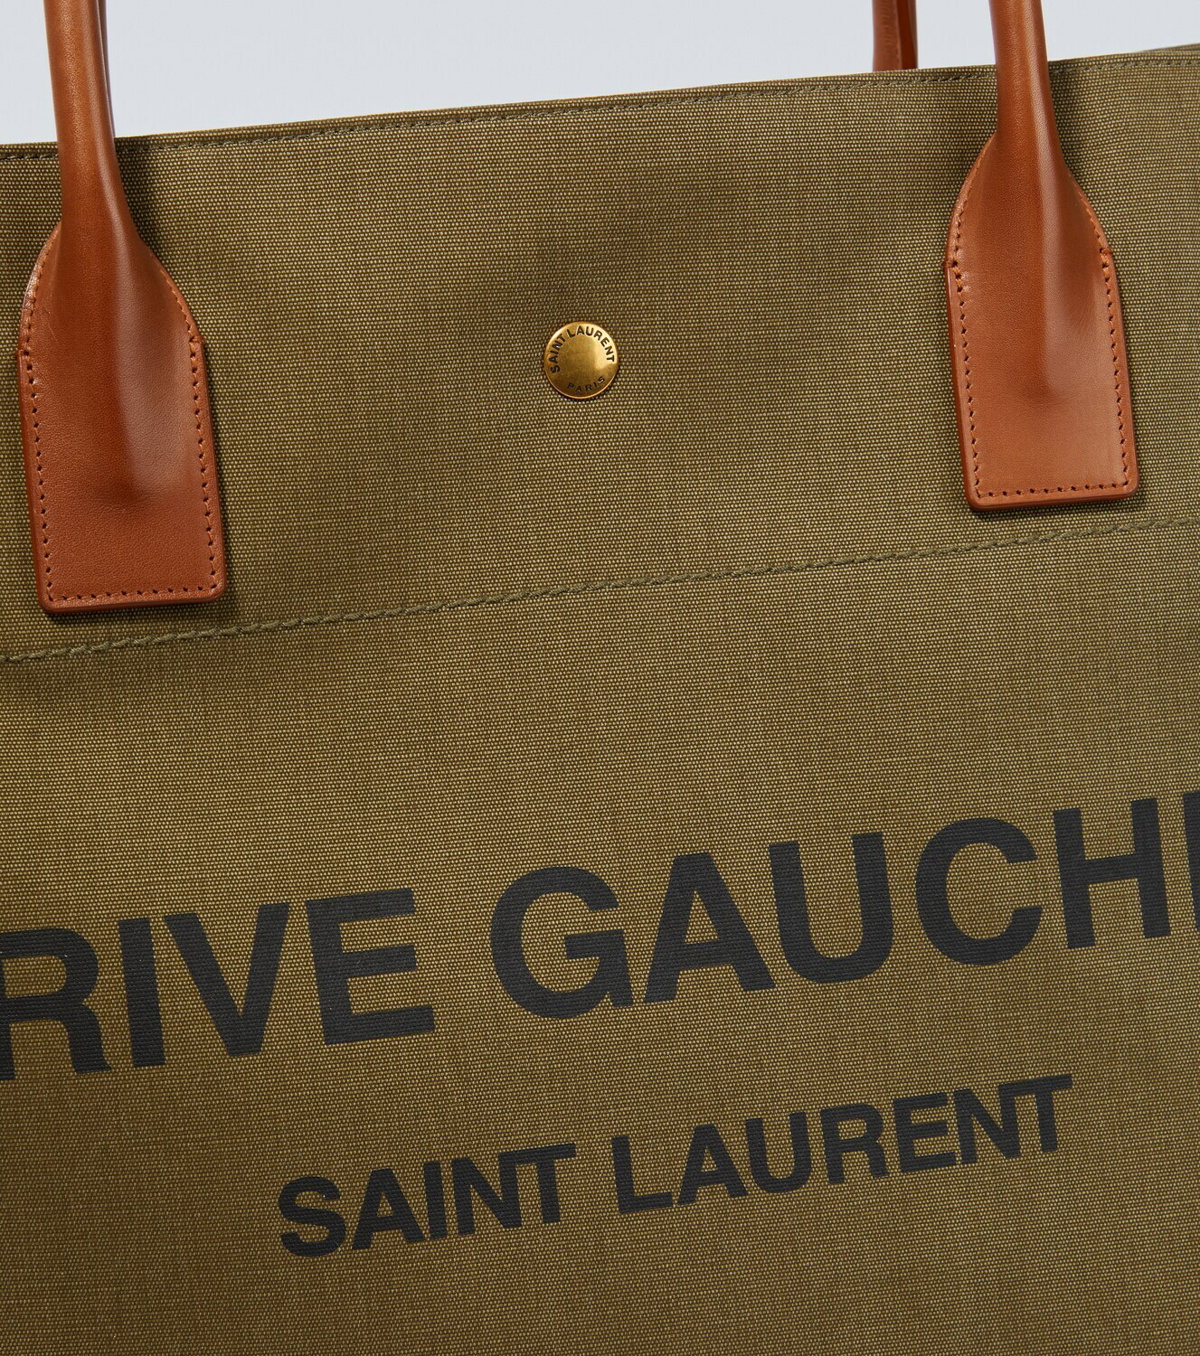 RIVE GAUCHE LARGE TOTE BAG IN CANVAS AND SMOOTH LEATHER, Saint Laurent